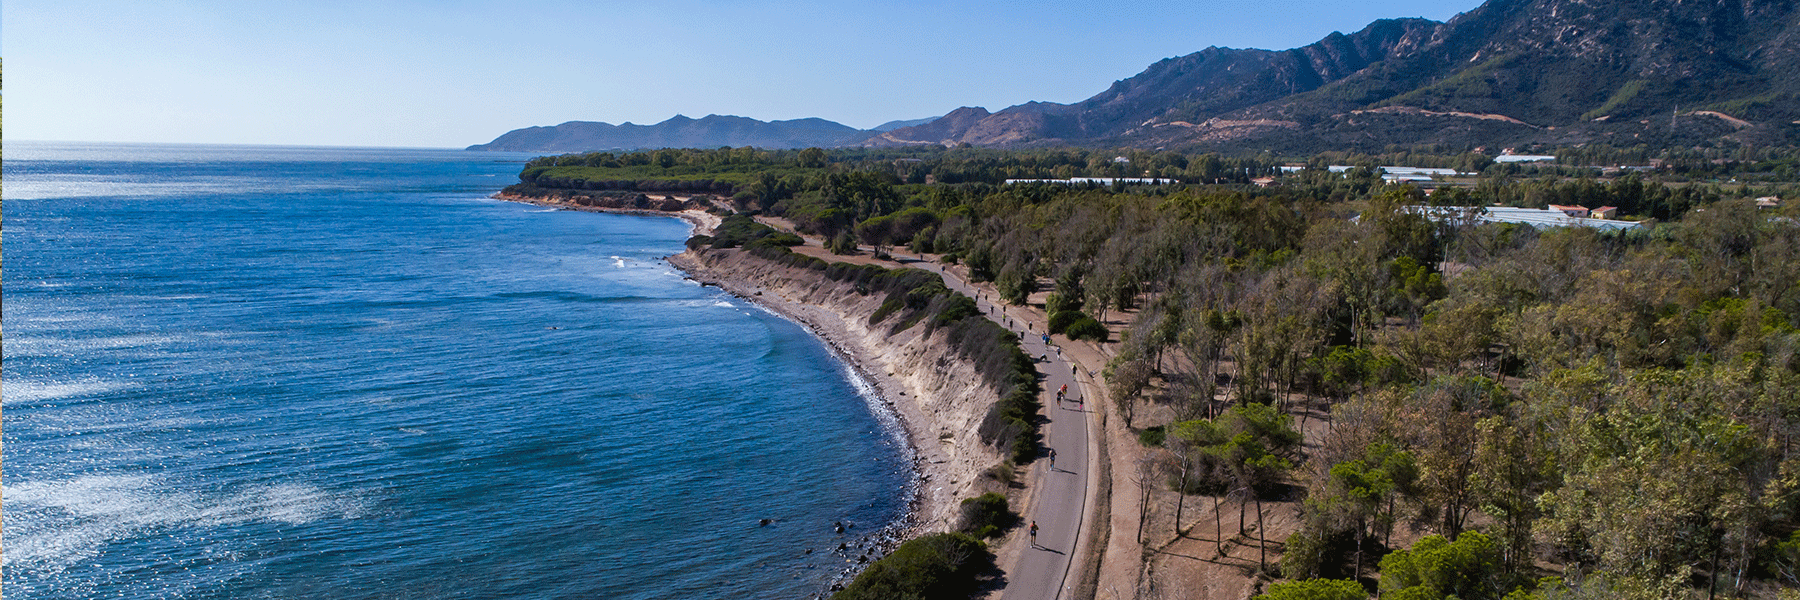 Athletes running on a street on the shore with turquoise Mediterranean Sea on the left and mountains and forests on the right in Santa Margherita di Pula, Sardegna